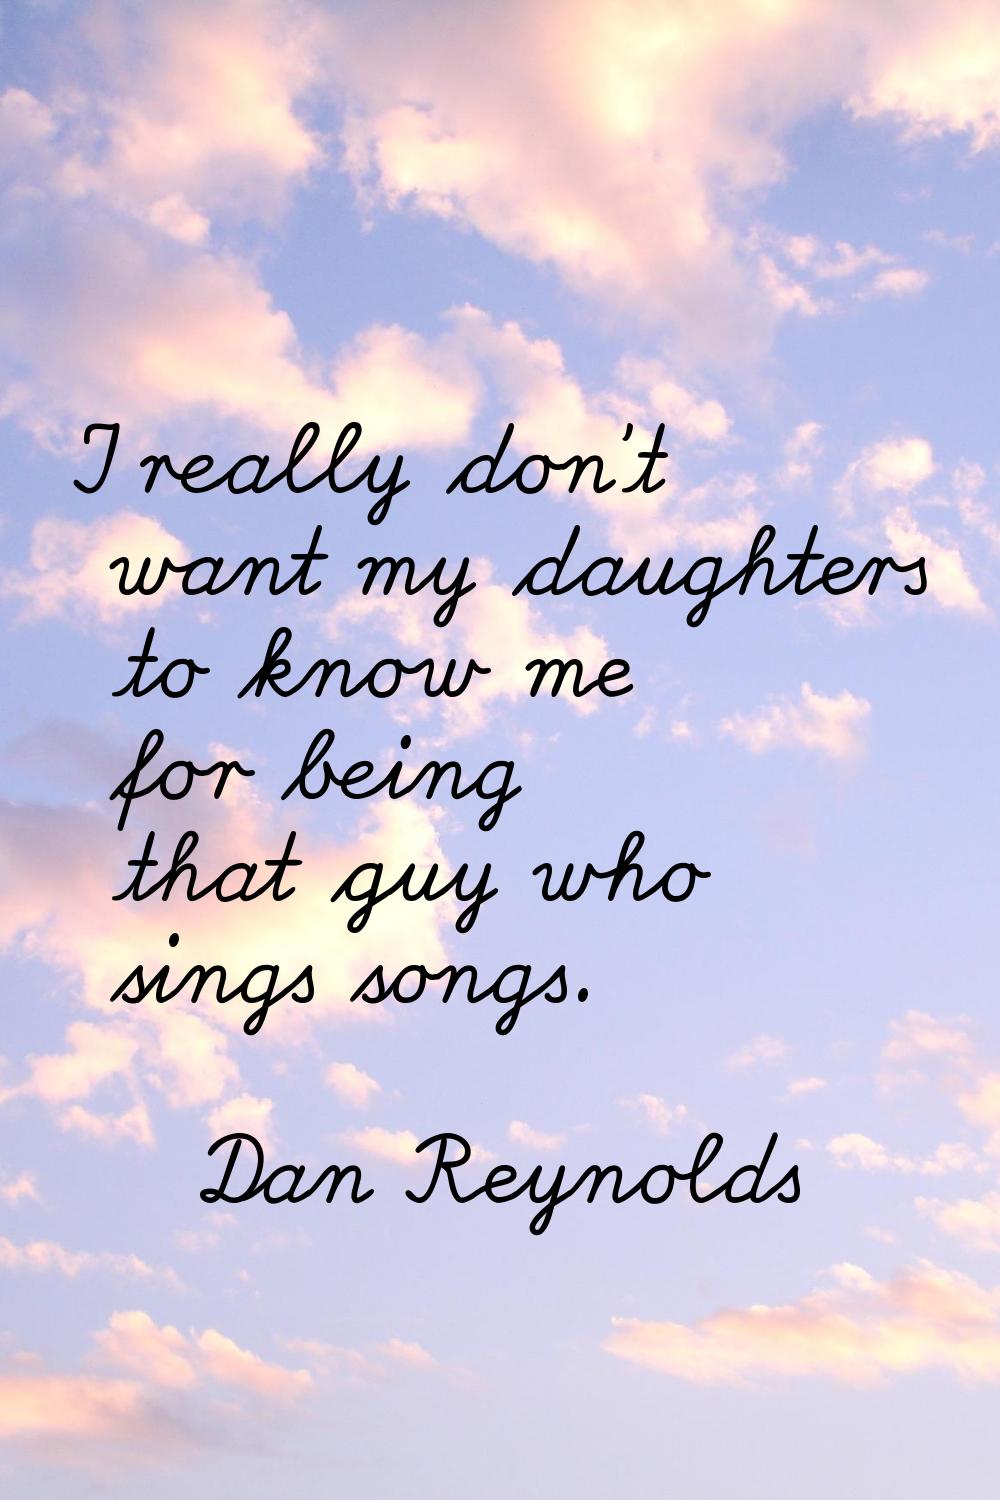 I really don't want my daughters to know me for being that guy who sings songs.